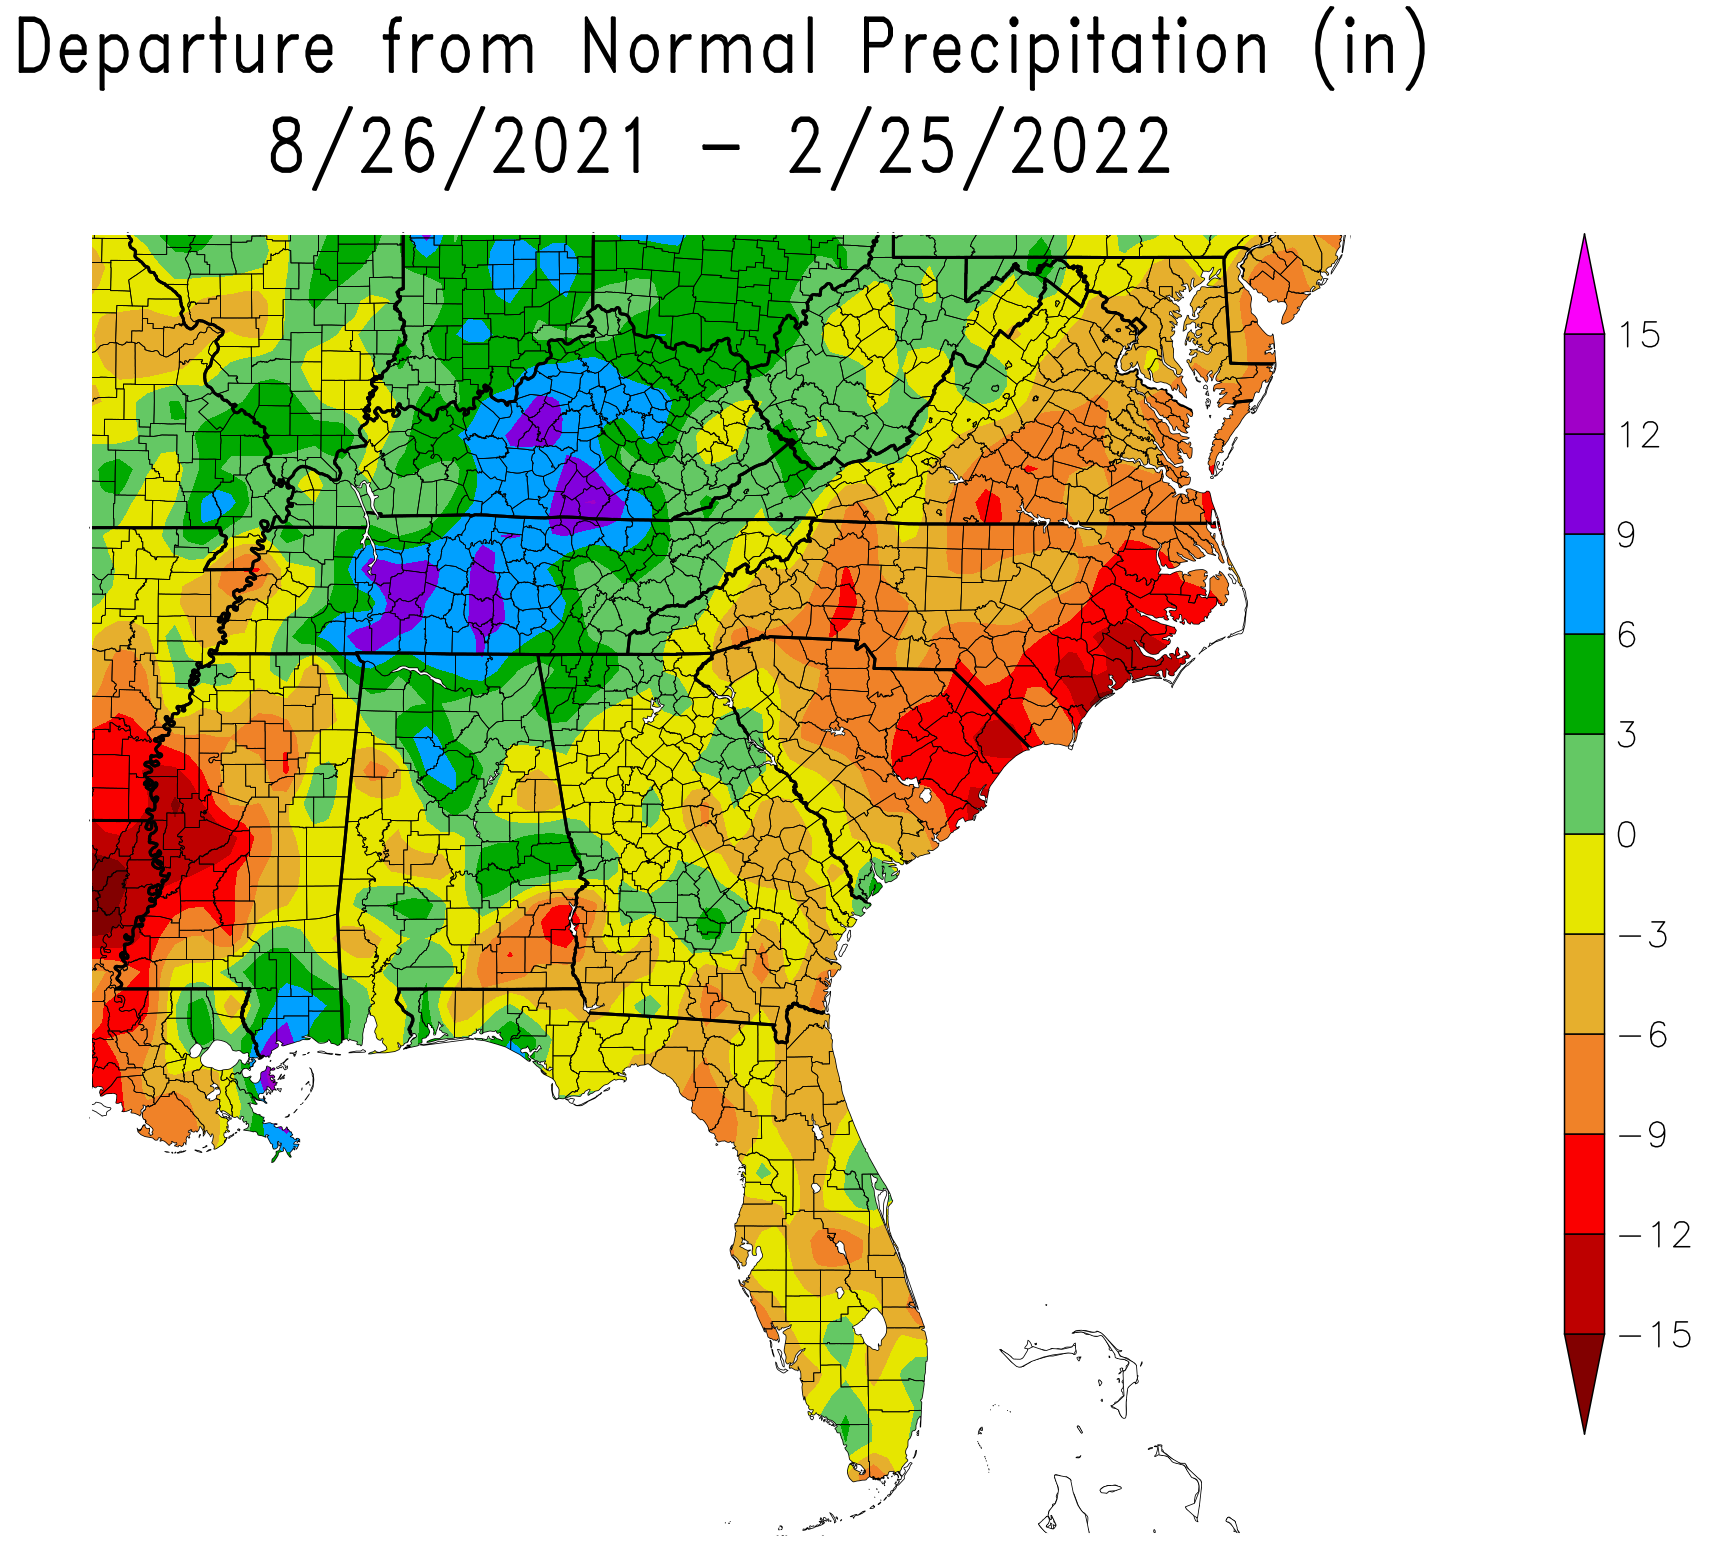 Departure from Normal Precipitation over the fall and winter